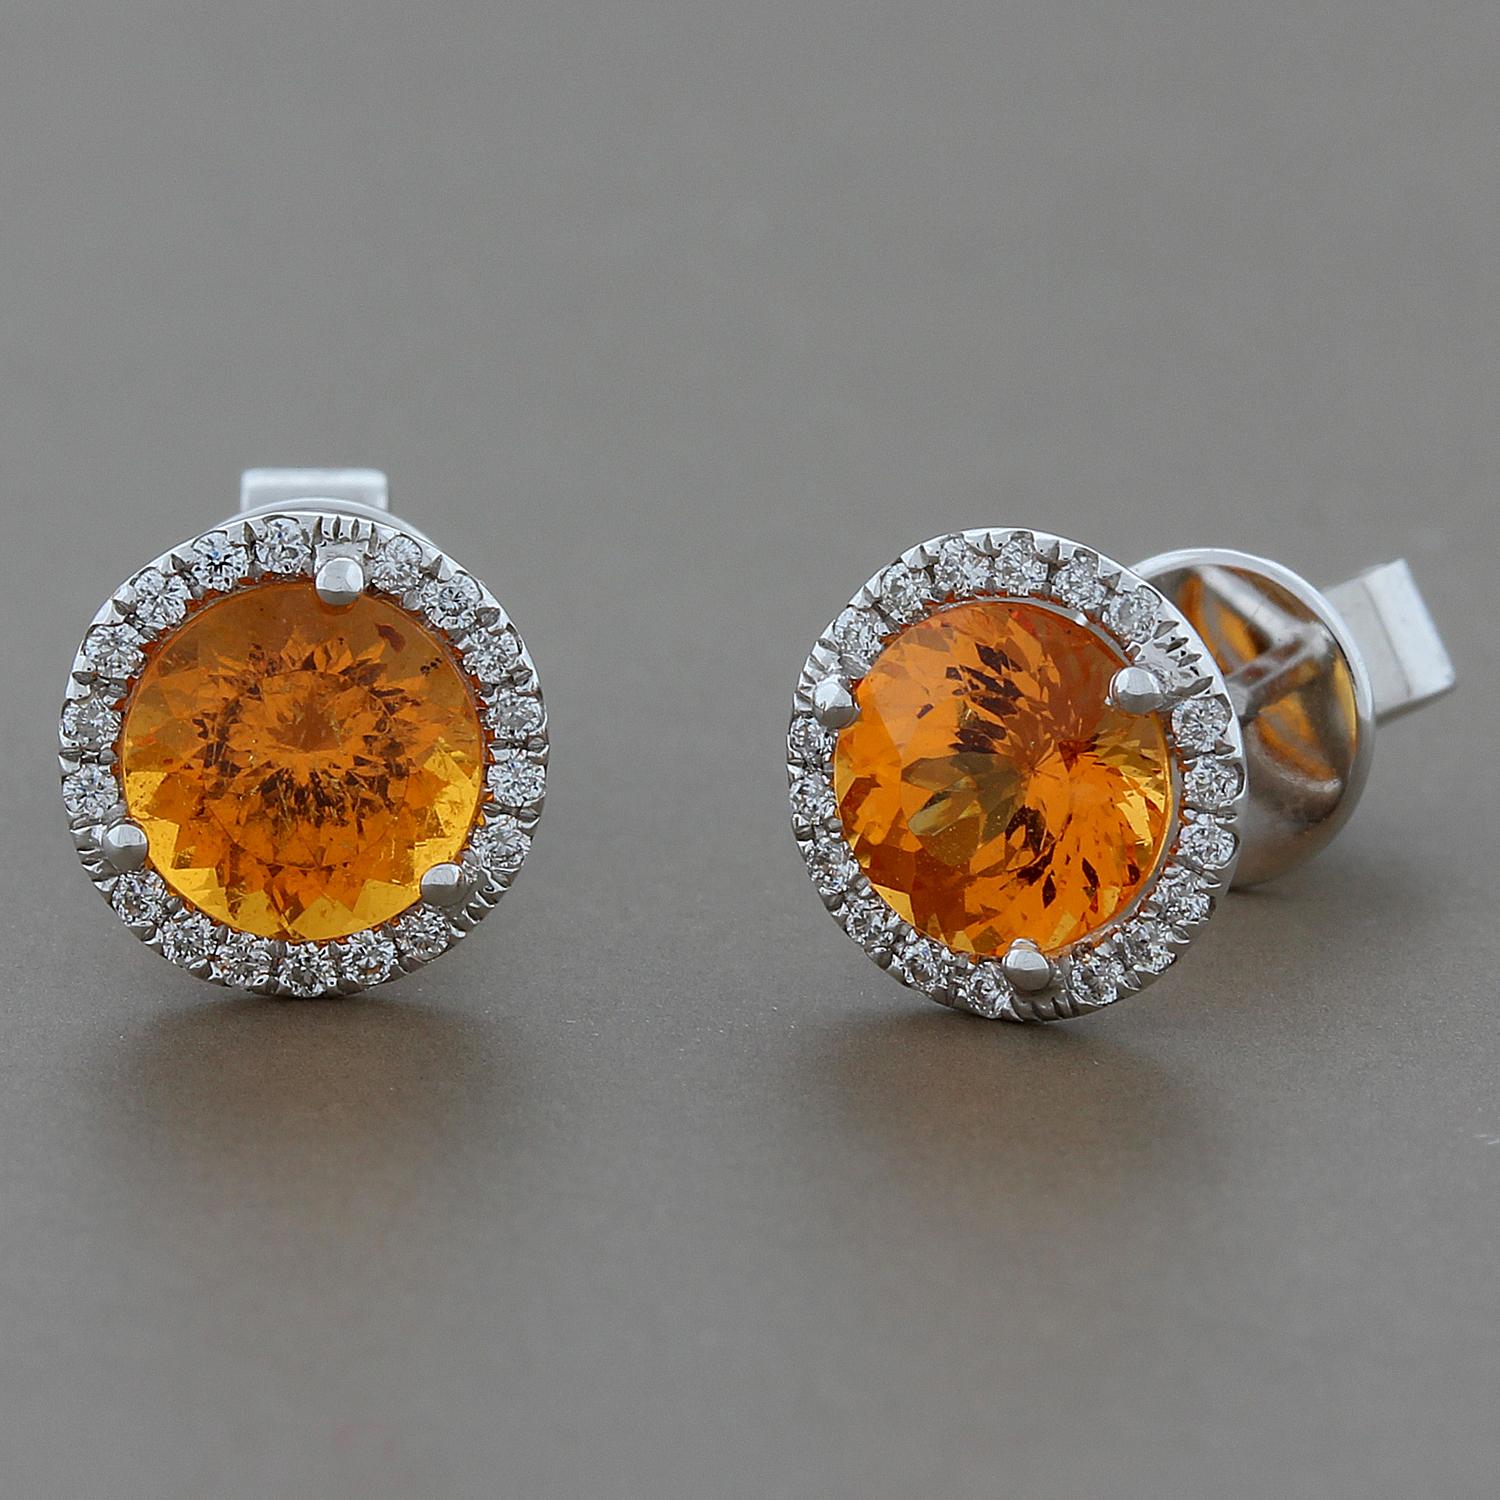 The perfect everyday stud earrings with a pop of orange!  Featuring 2.12 carats of round mandarin garnet, in a classic halo of 0.16 carats of VS quality round white diamonds. Set in 18K white gold.

Approximately, 8 mm diameter
